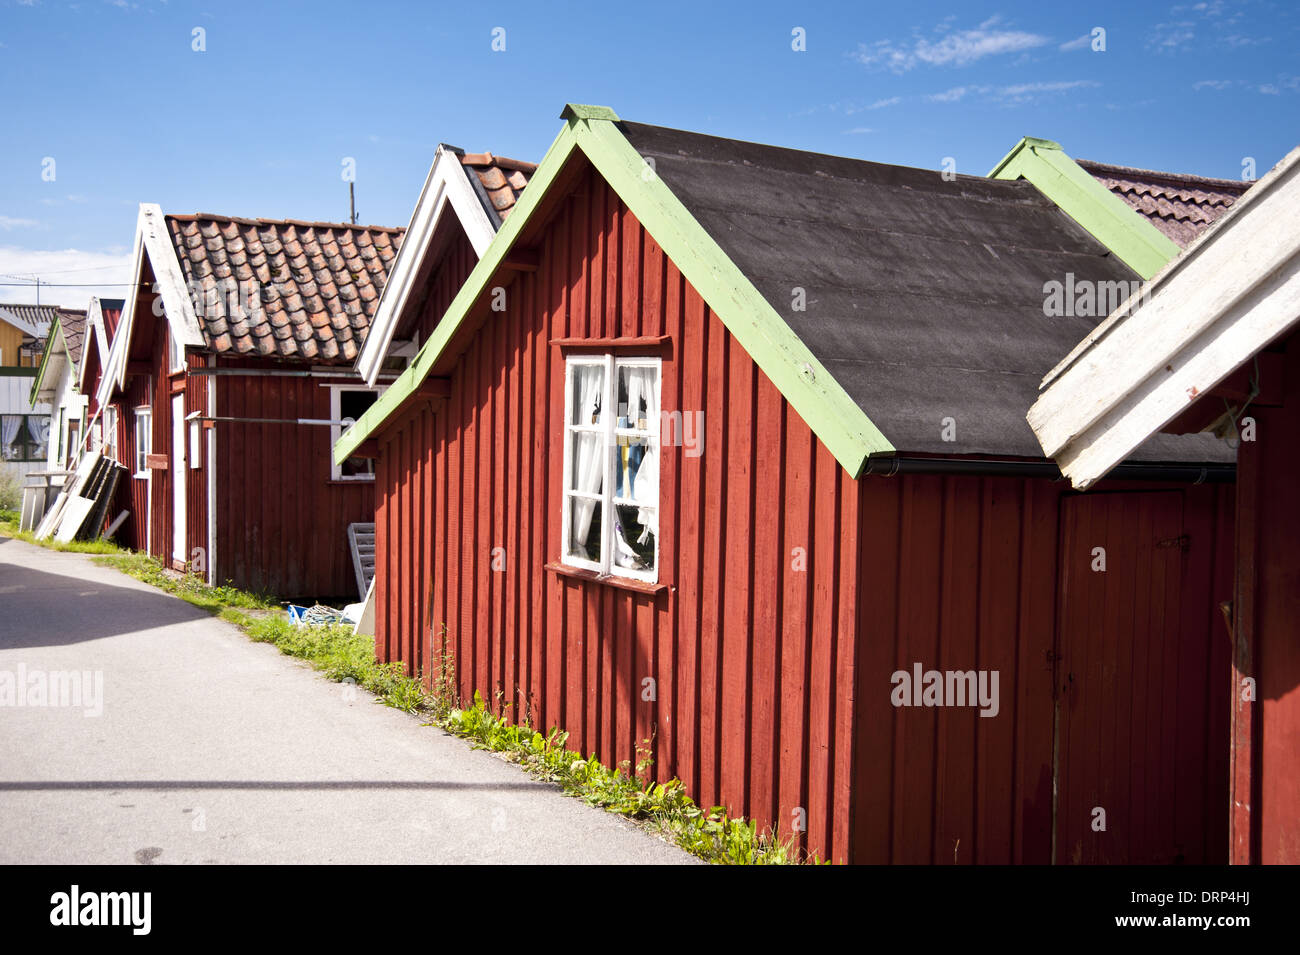 The Island Of Åstol High Resolution Stock Photography and Images - Alamy